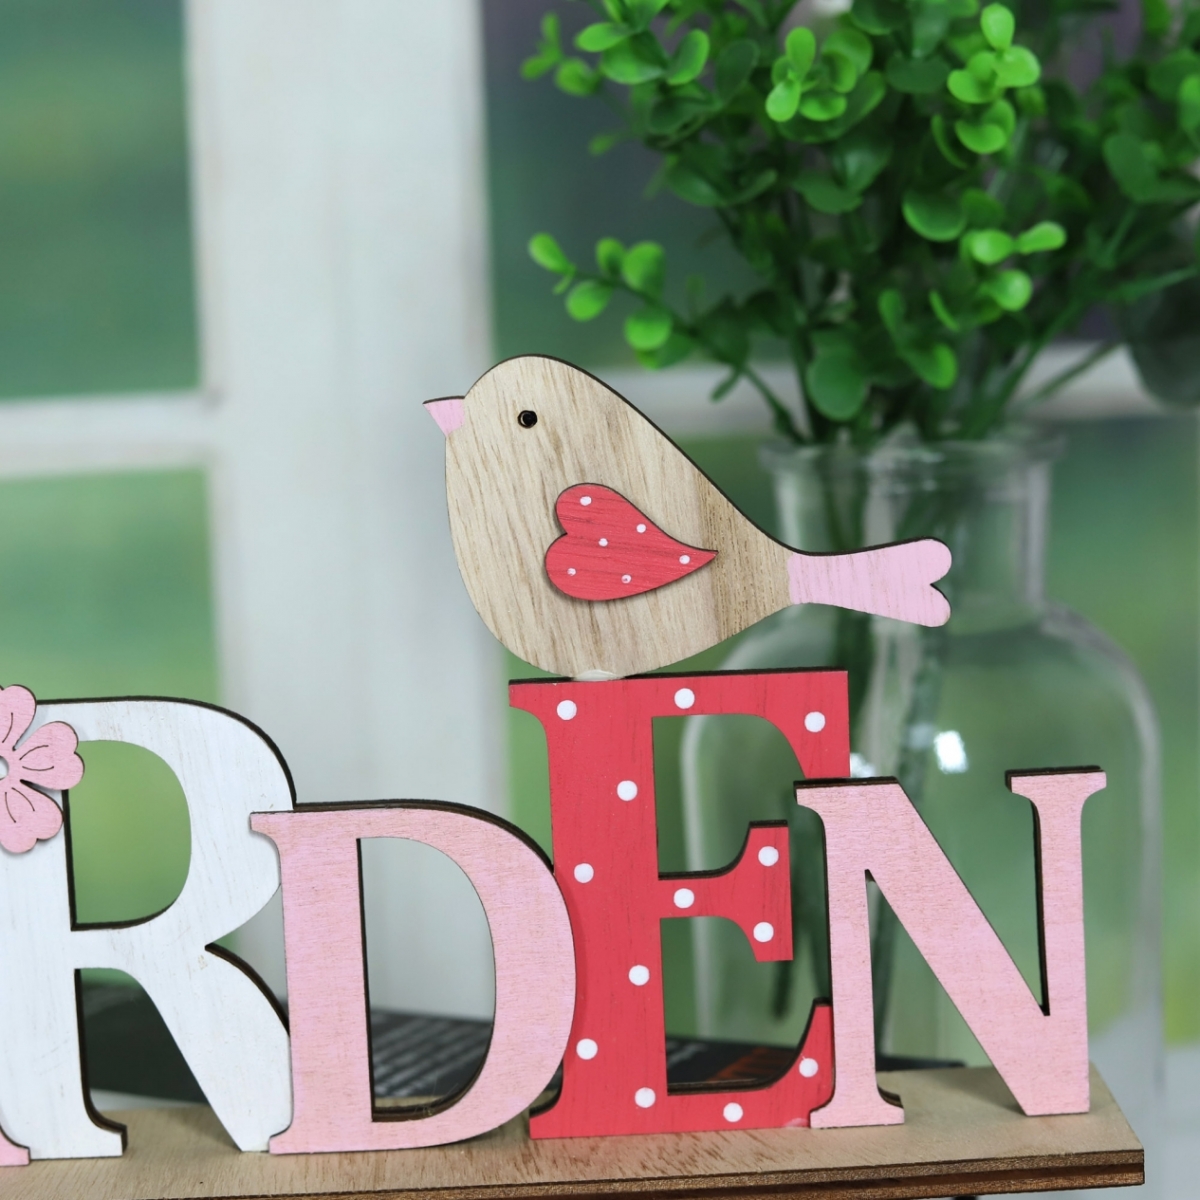 30*5.5*15Cm Green/Natural Spring Wooden Craft Easter Words With Bird-GOON- Home Decoration, Christmas Decoration, Halloween Decor, Harvest Decor, Easter Decor, Thanksgiving Day Decor, Party Decor